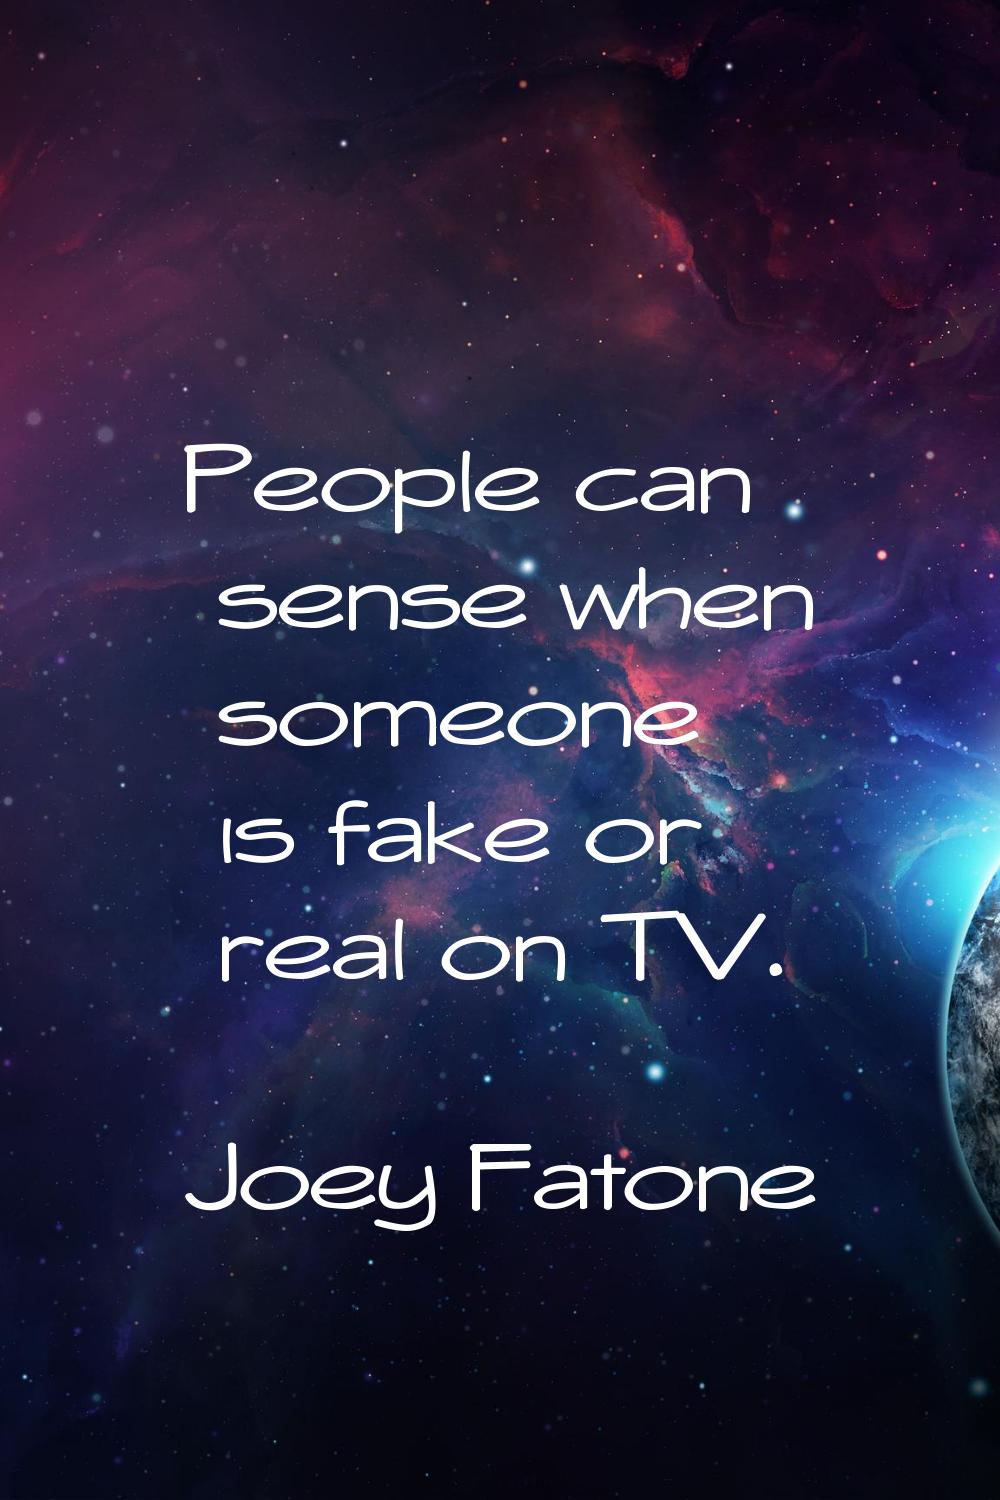 People can sense when someone is fake or real on TV.